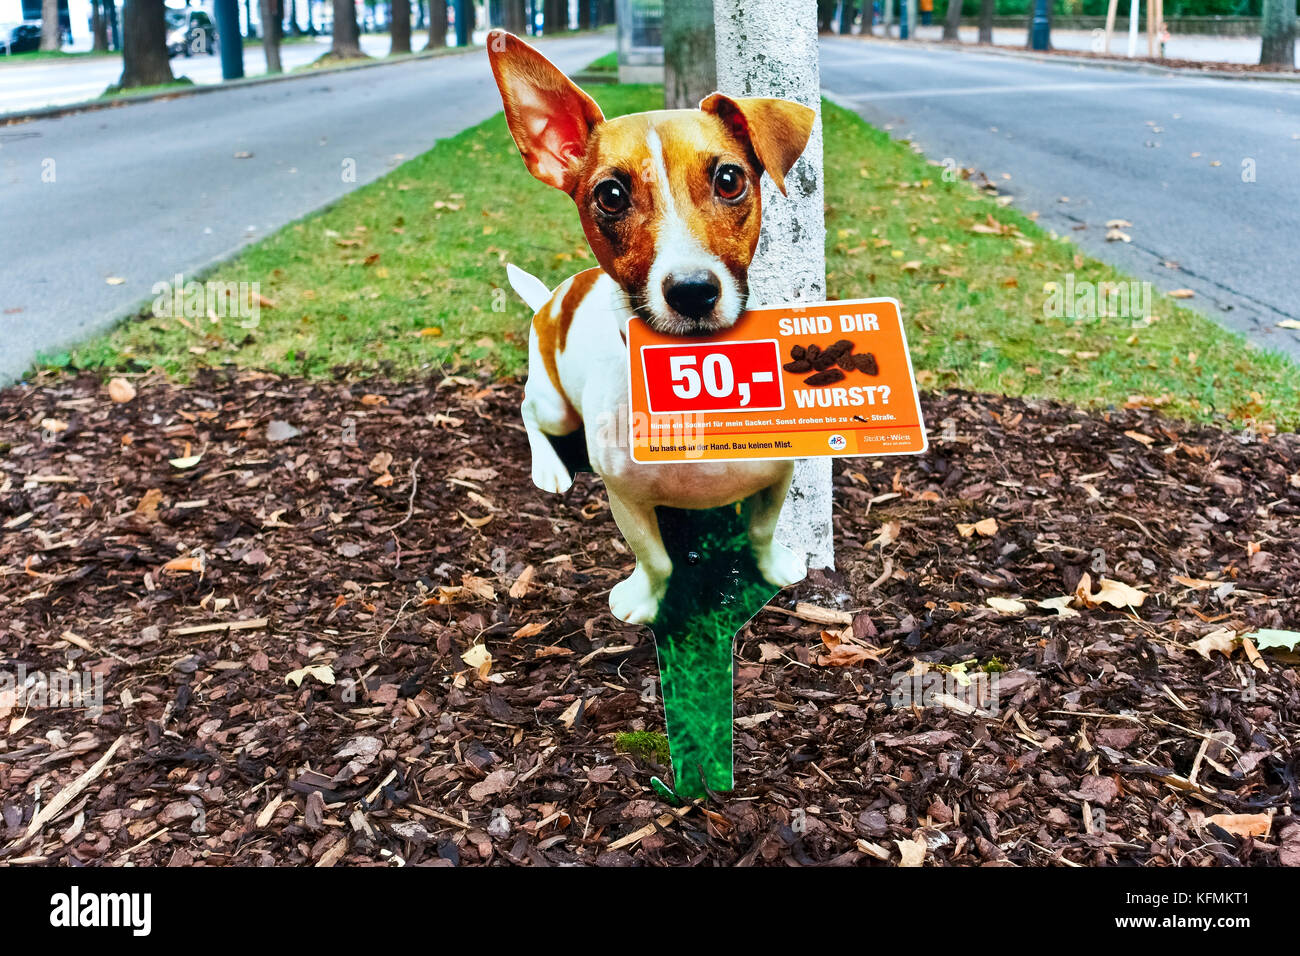 Sign warning dog owners of the 50 Euros fine for not removing dog waste. City park. Vienna, Wien, Austria, Europe, European Union, EU. Stock Photo